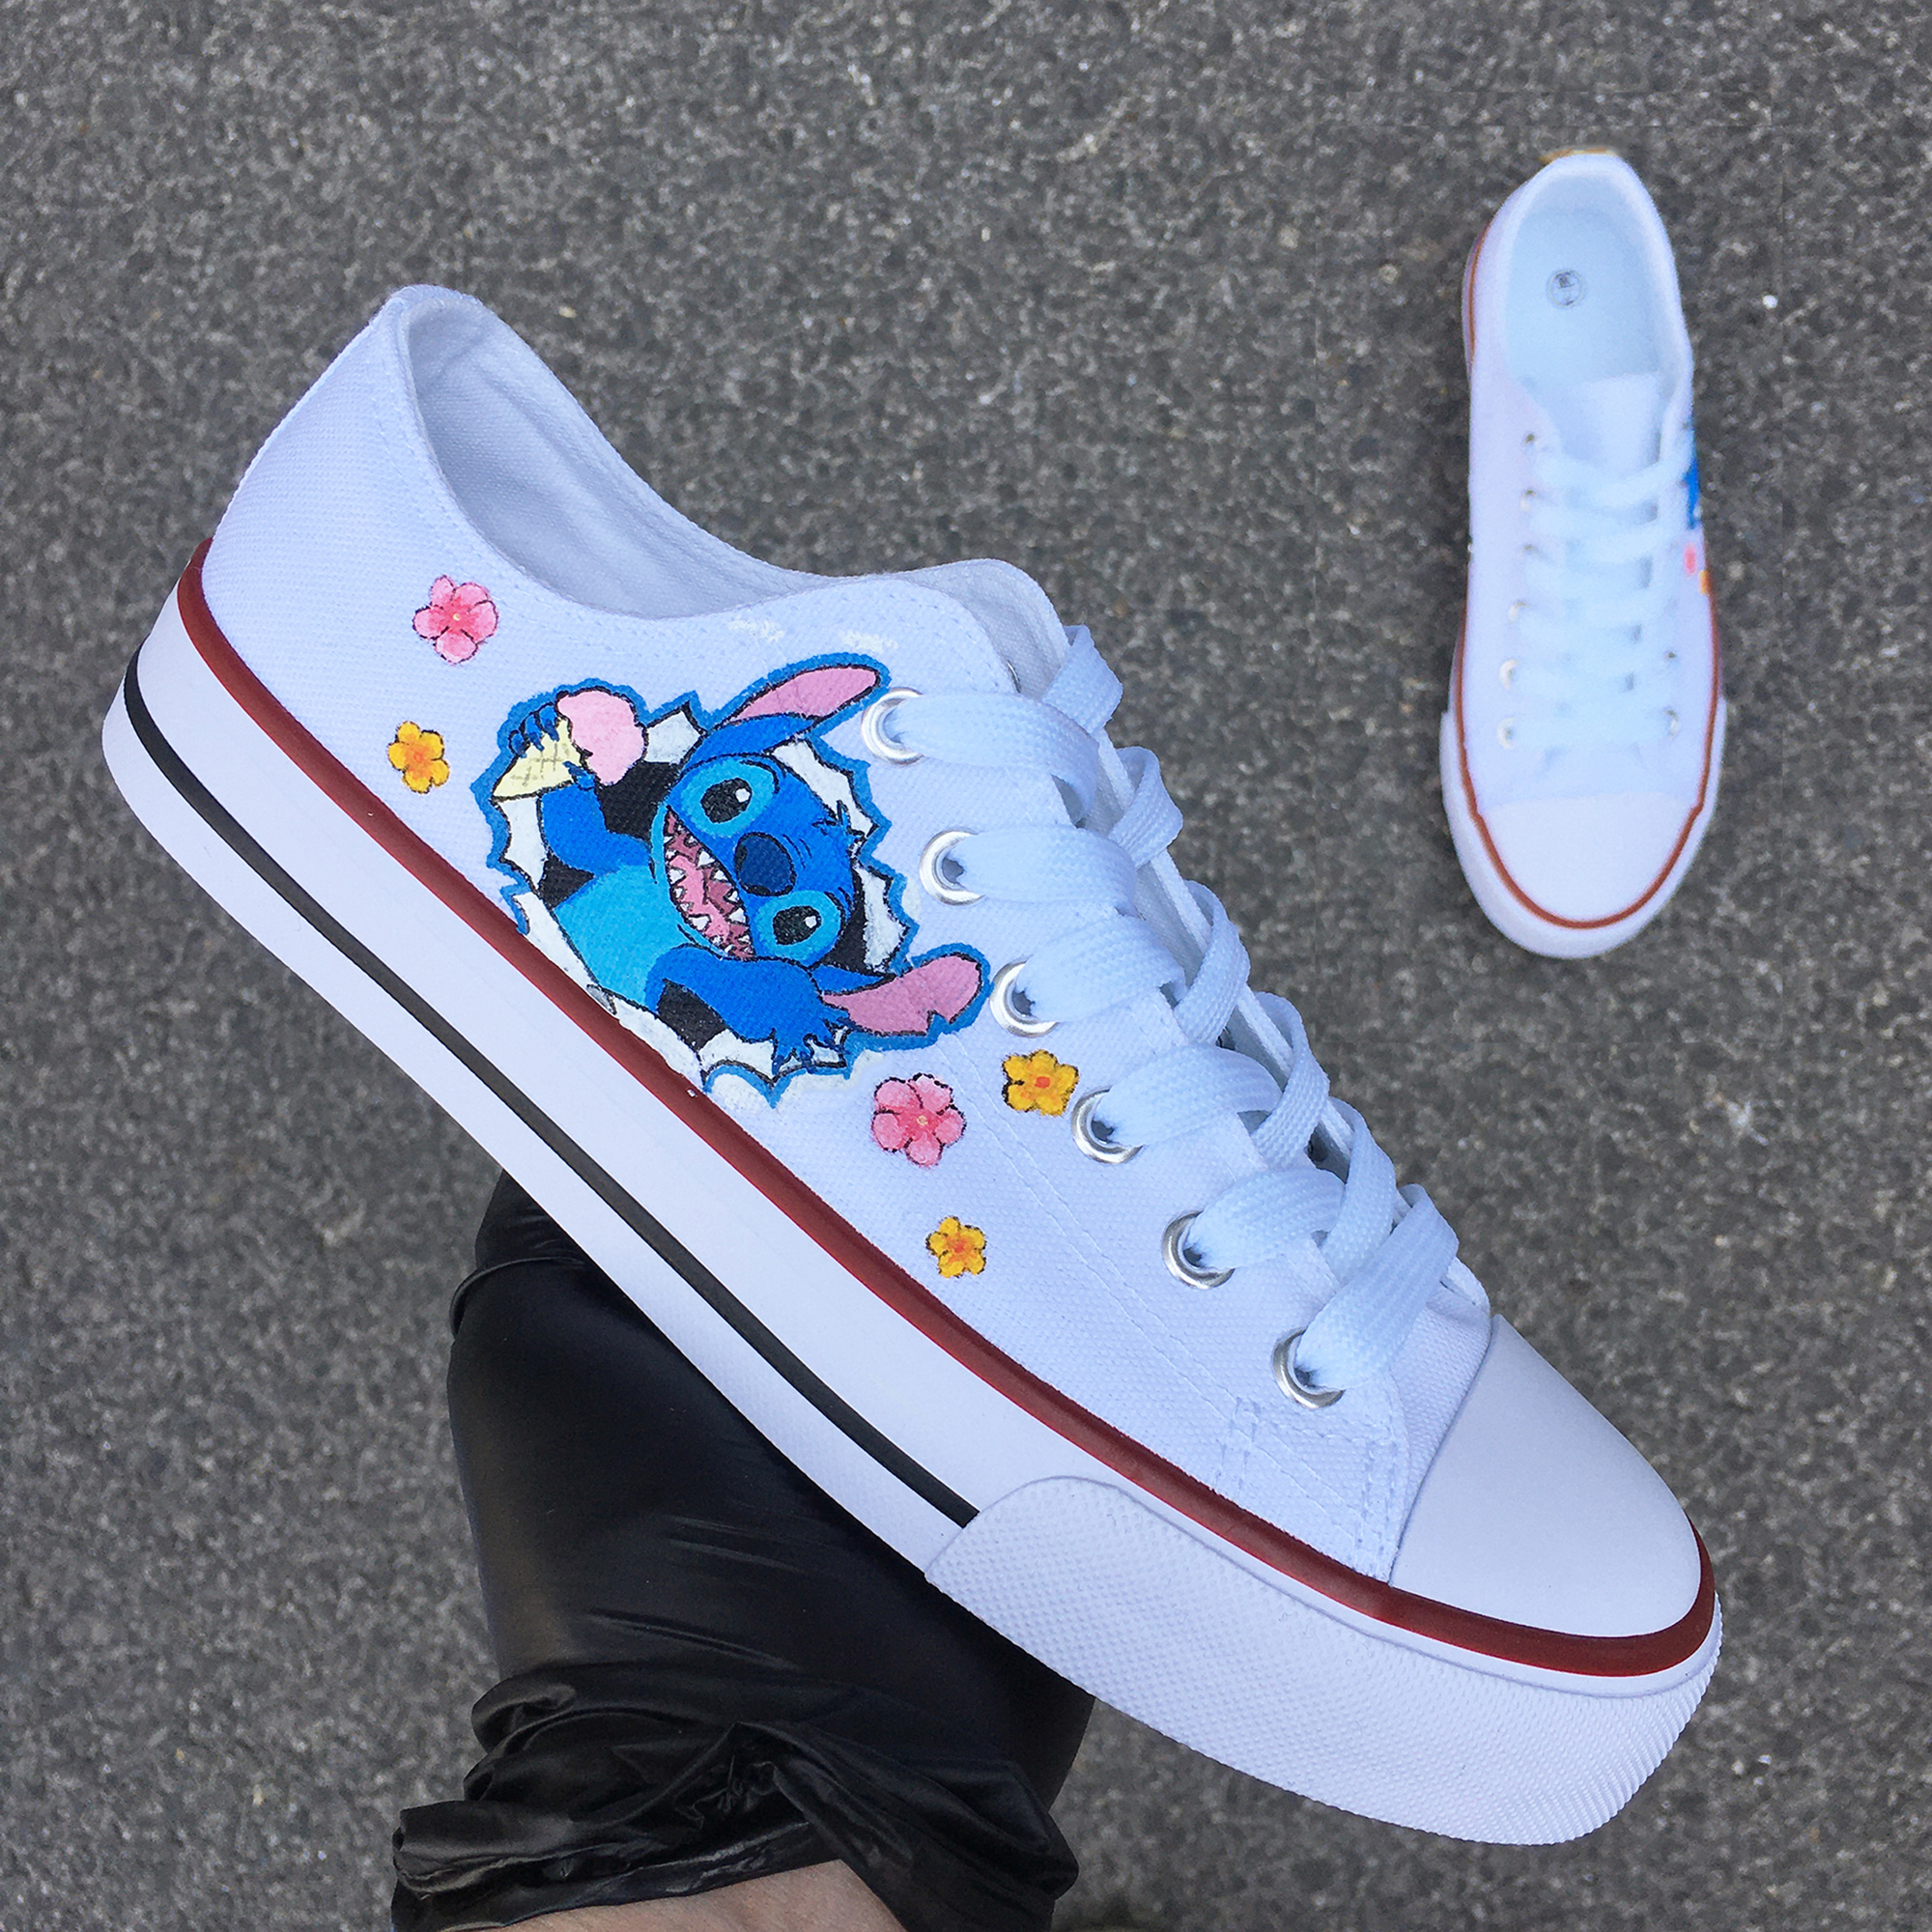 Stitch Sprinkle Flowers Custom Hand Painted Canvas Shoes 